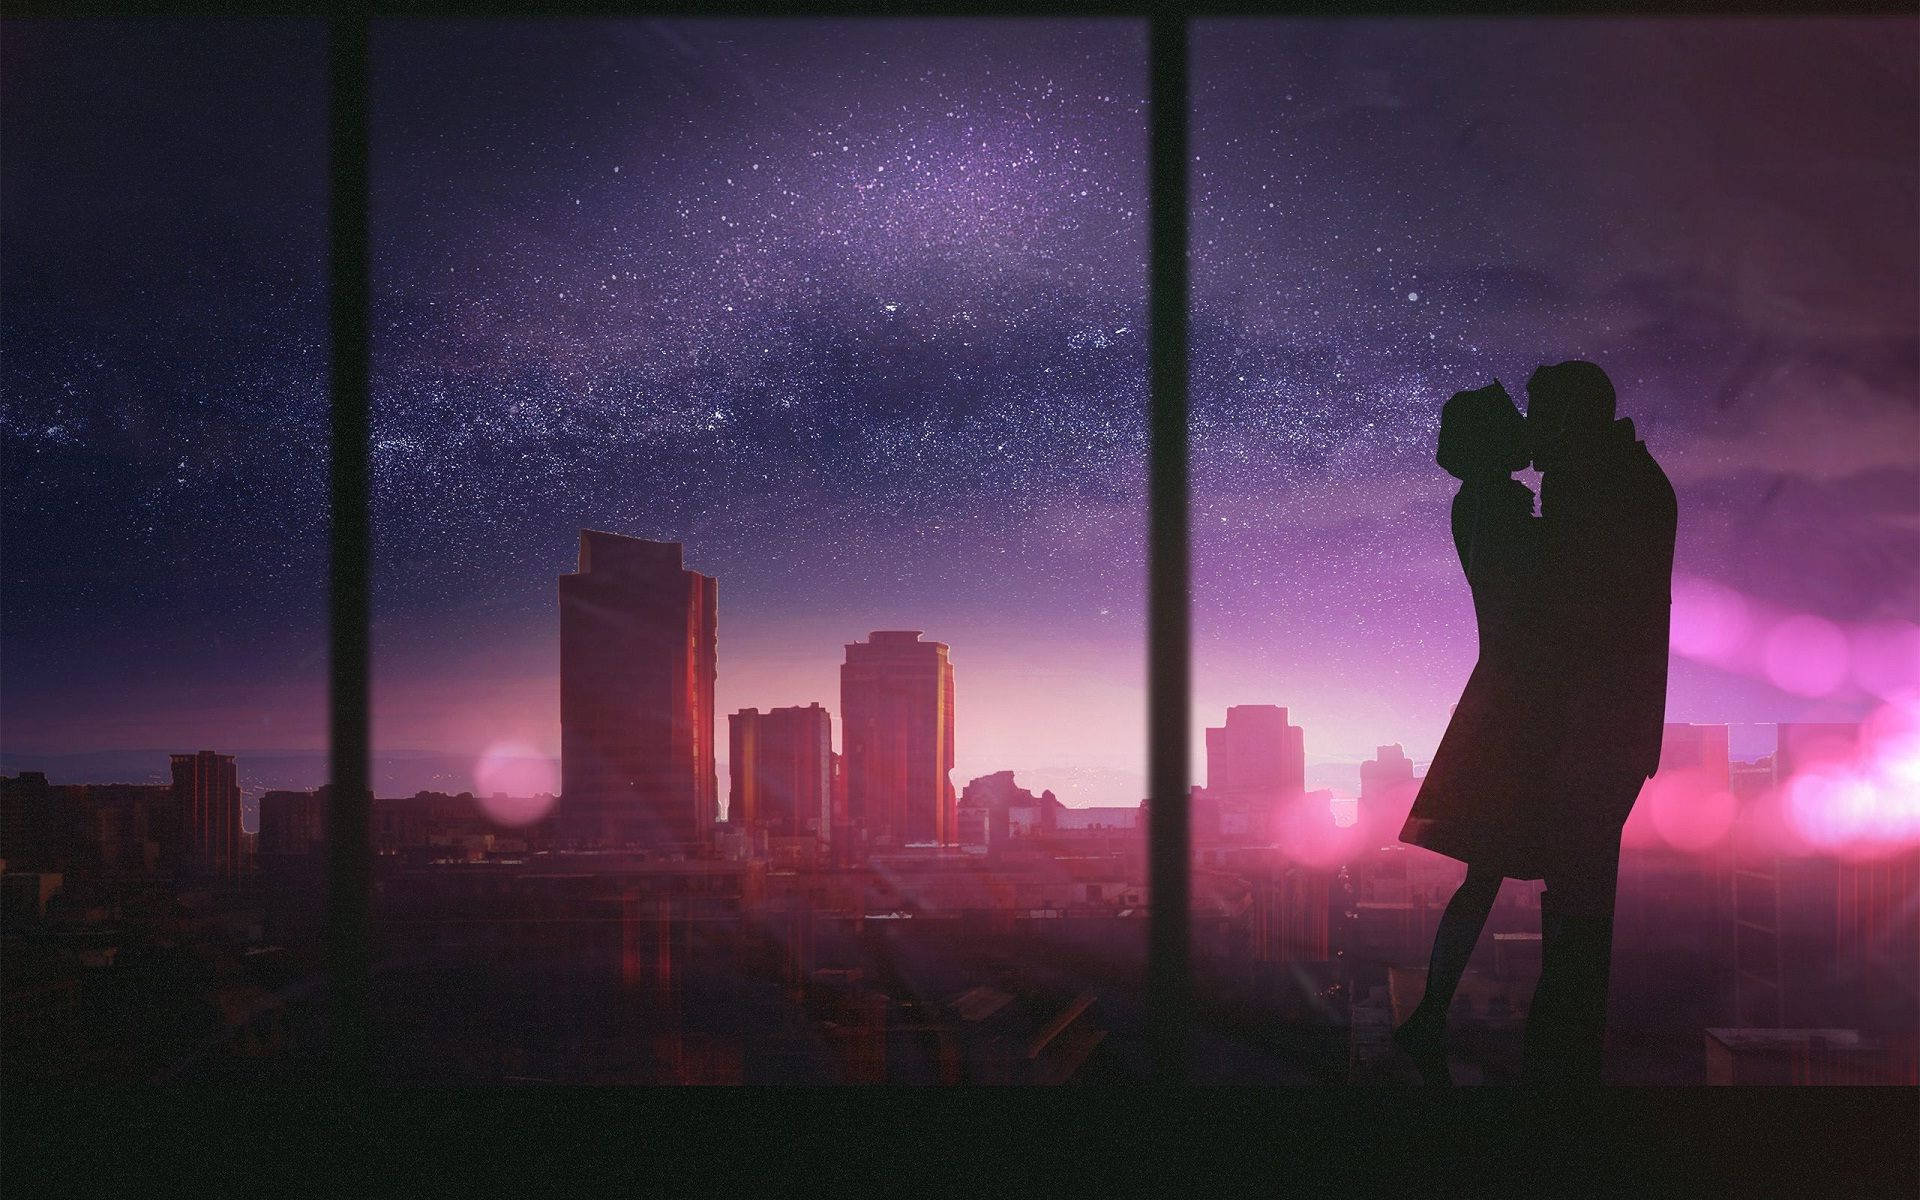 Anime Couple Aesthetic Wallpapers - Wallpaper Cave